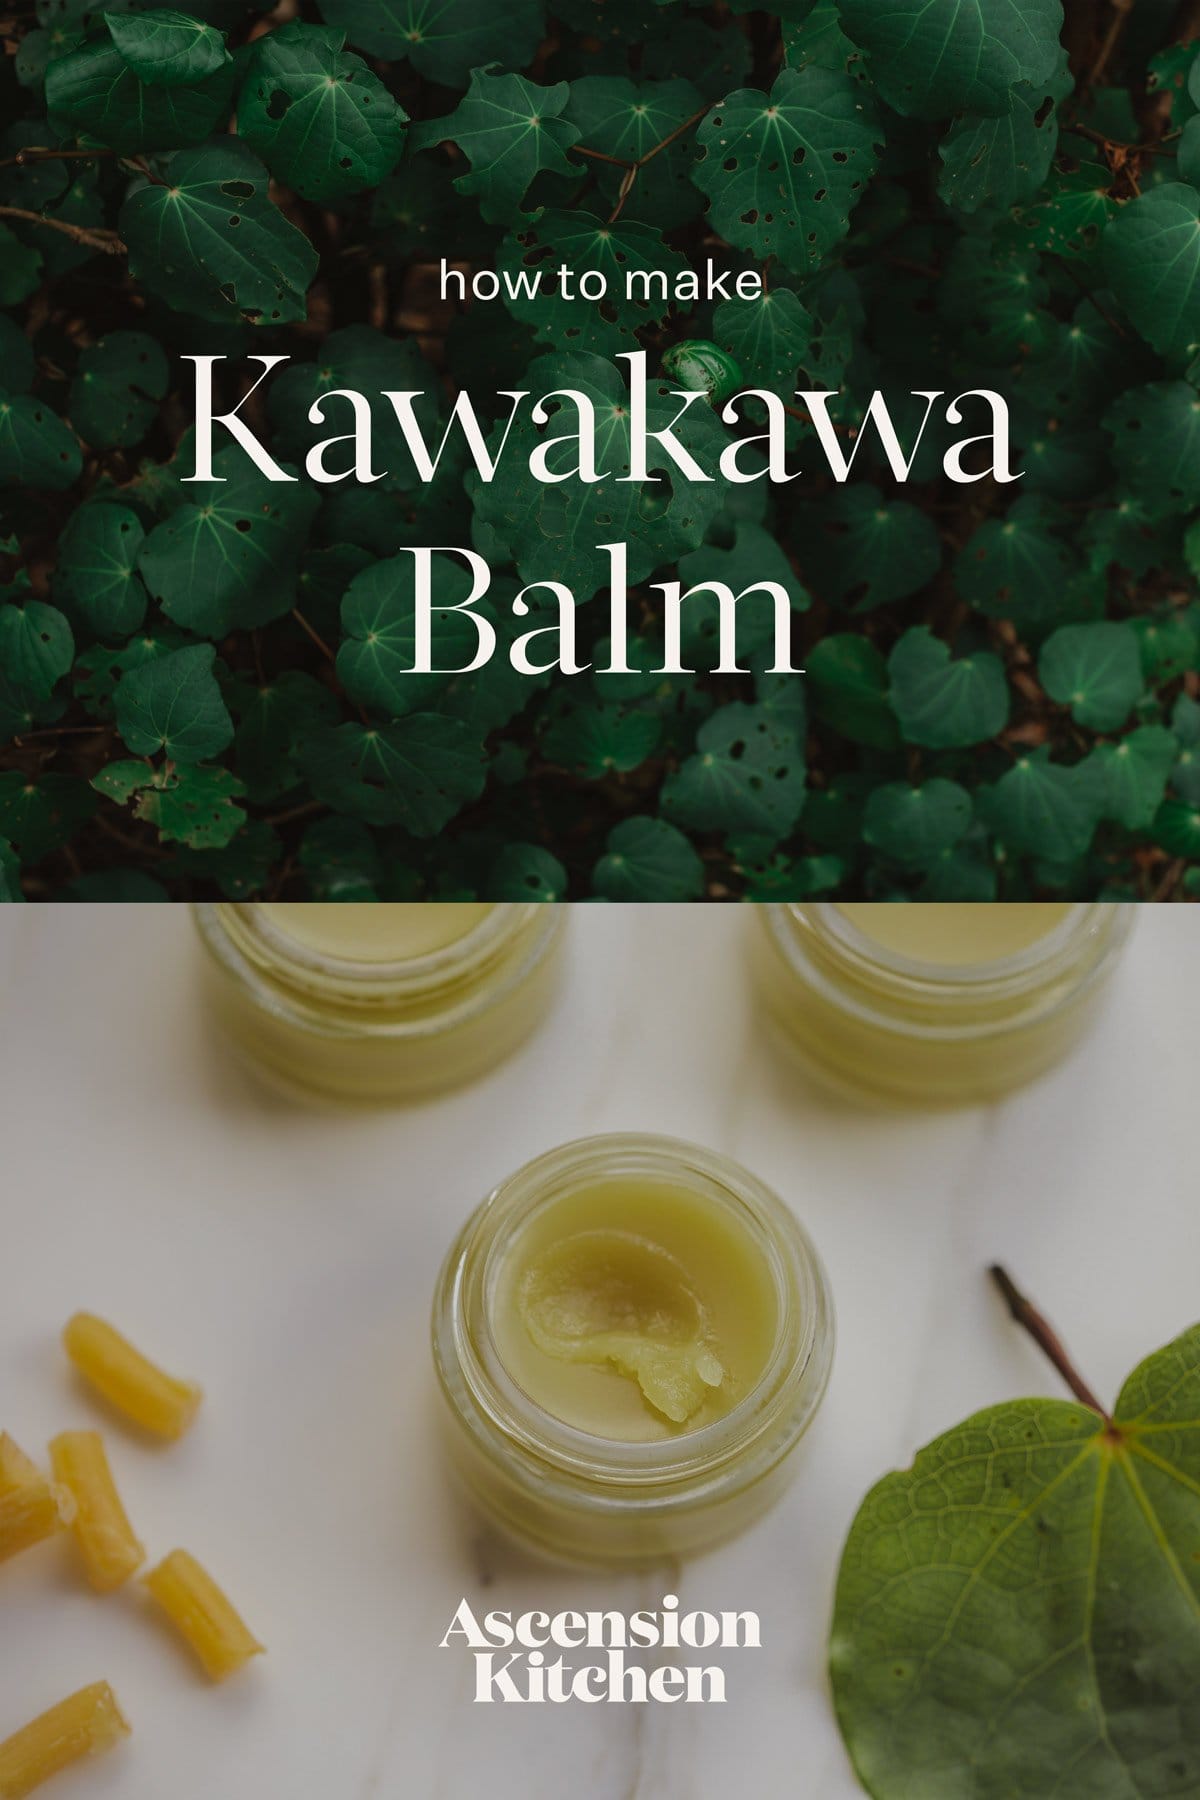 A photo collage of a lush kawakawa bush at the top, and a few uncapped pots of kawakawa balm at the bottom. Text over the image reads "How to make kawakawa balm", with the blog logo at the bottom.